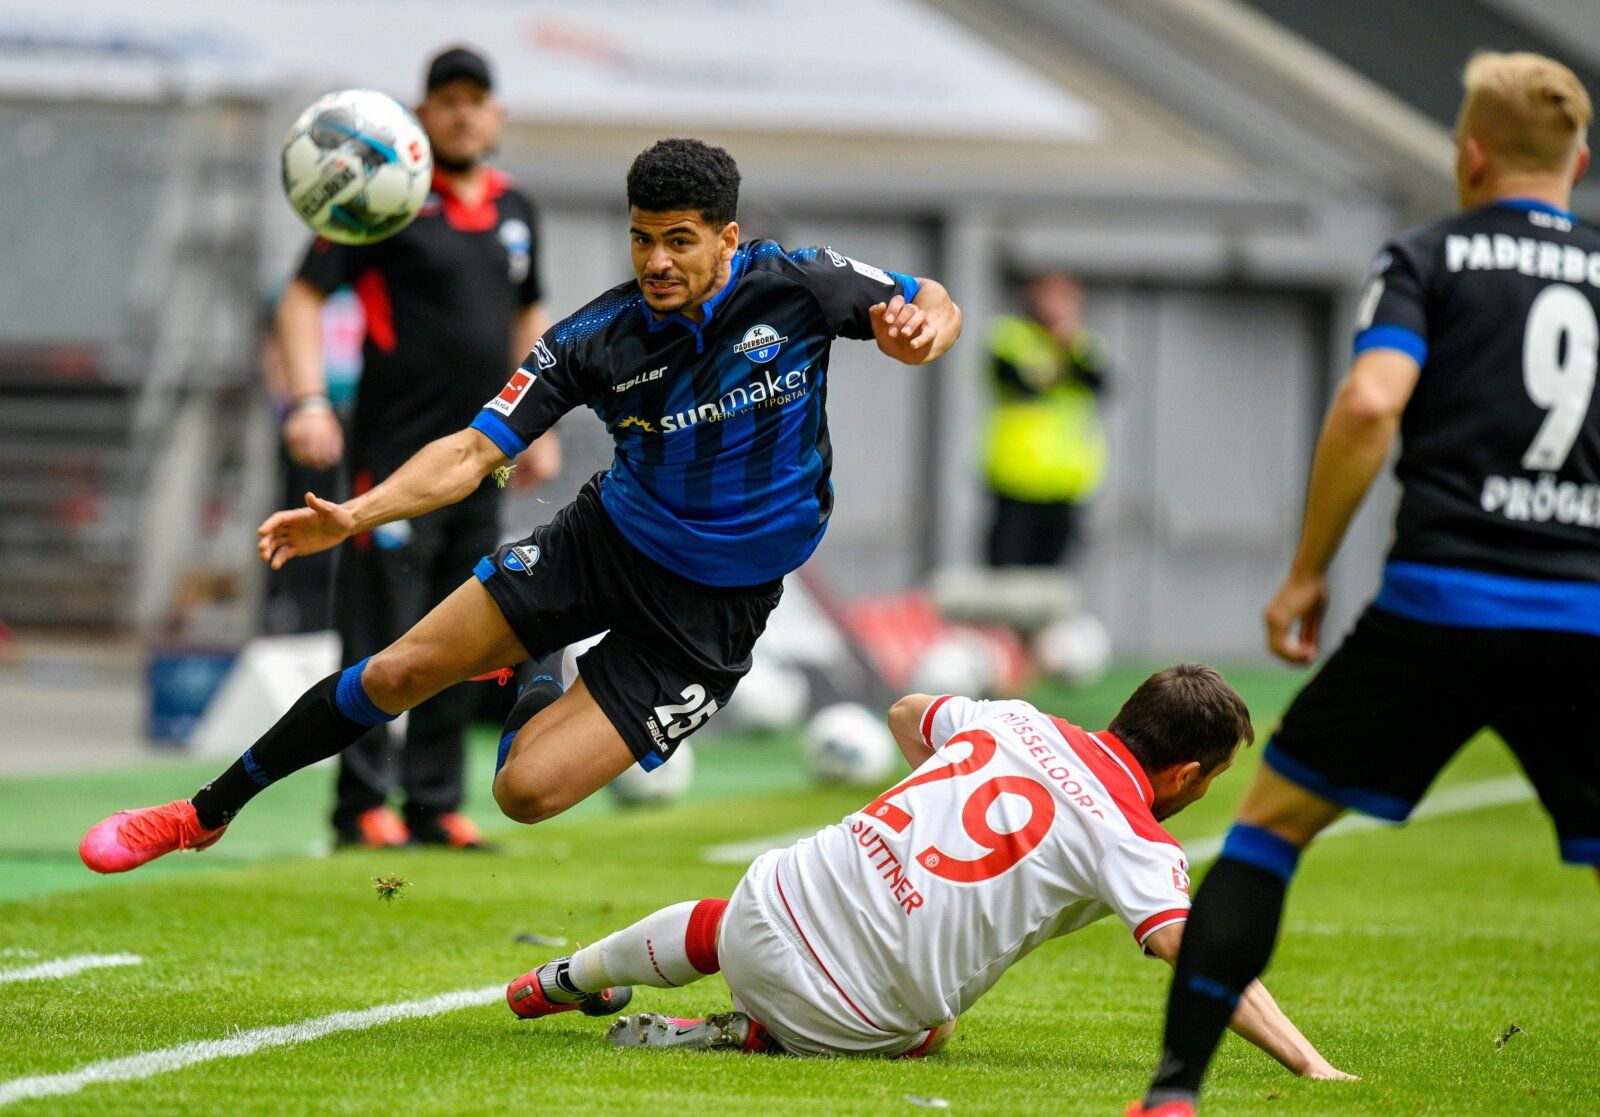 Soccer Football - Bundesliga - Fortuna Dusseldorf v SC Paderborn - Merkur Spiel-Arena, Dusseldorf, Germany - May 16, 2020 Fortuna Dusseldorf's Markus Suttner in action with Paderborn's Mohamed Drager, as play resumes behind closed doors following the outbreak of the coronavirus disease (COVID-19) Sascha Schuermann/Pool via REUTERS  DFL regulations prohibit any use of photographs as image sequences and/or quasi-video